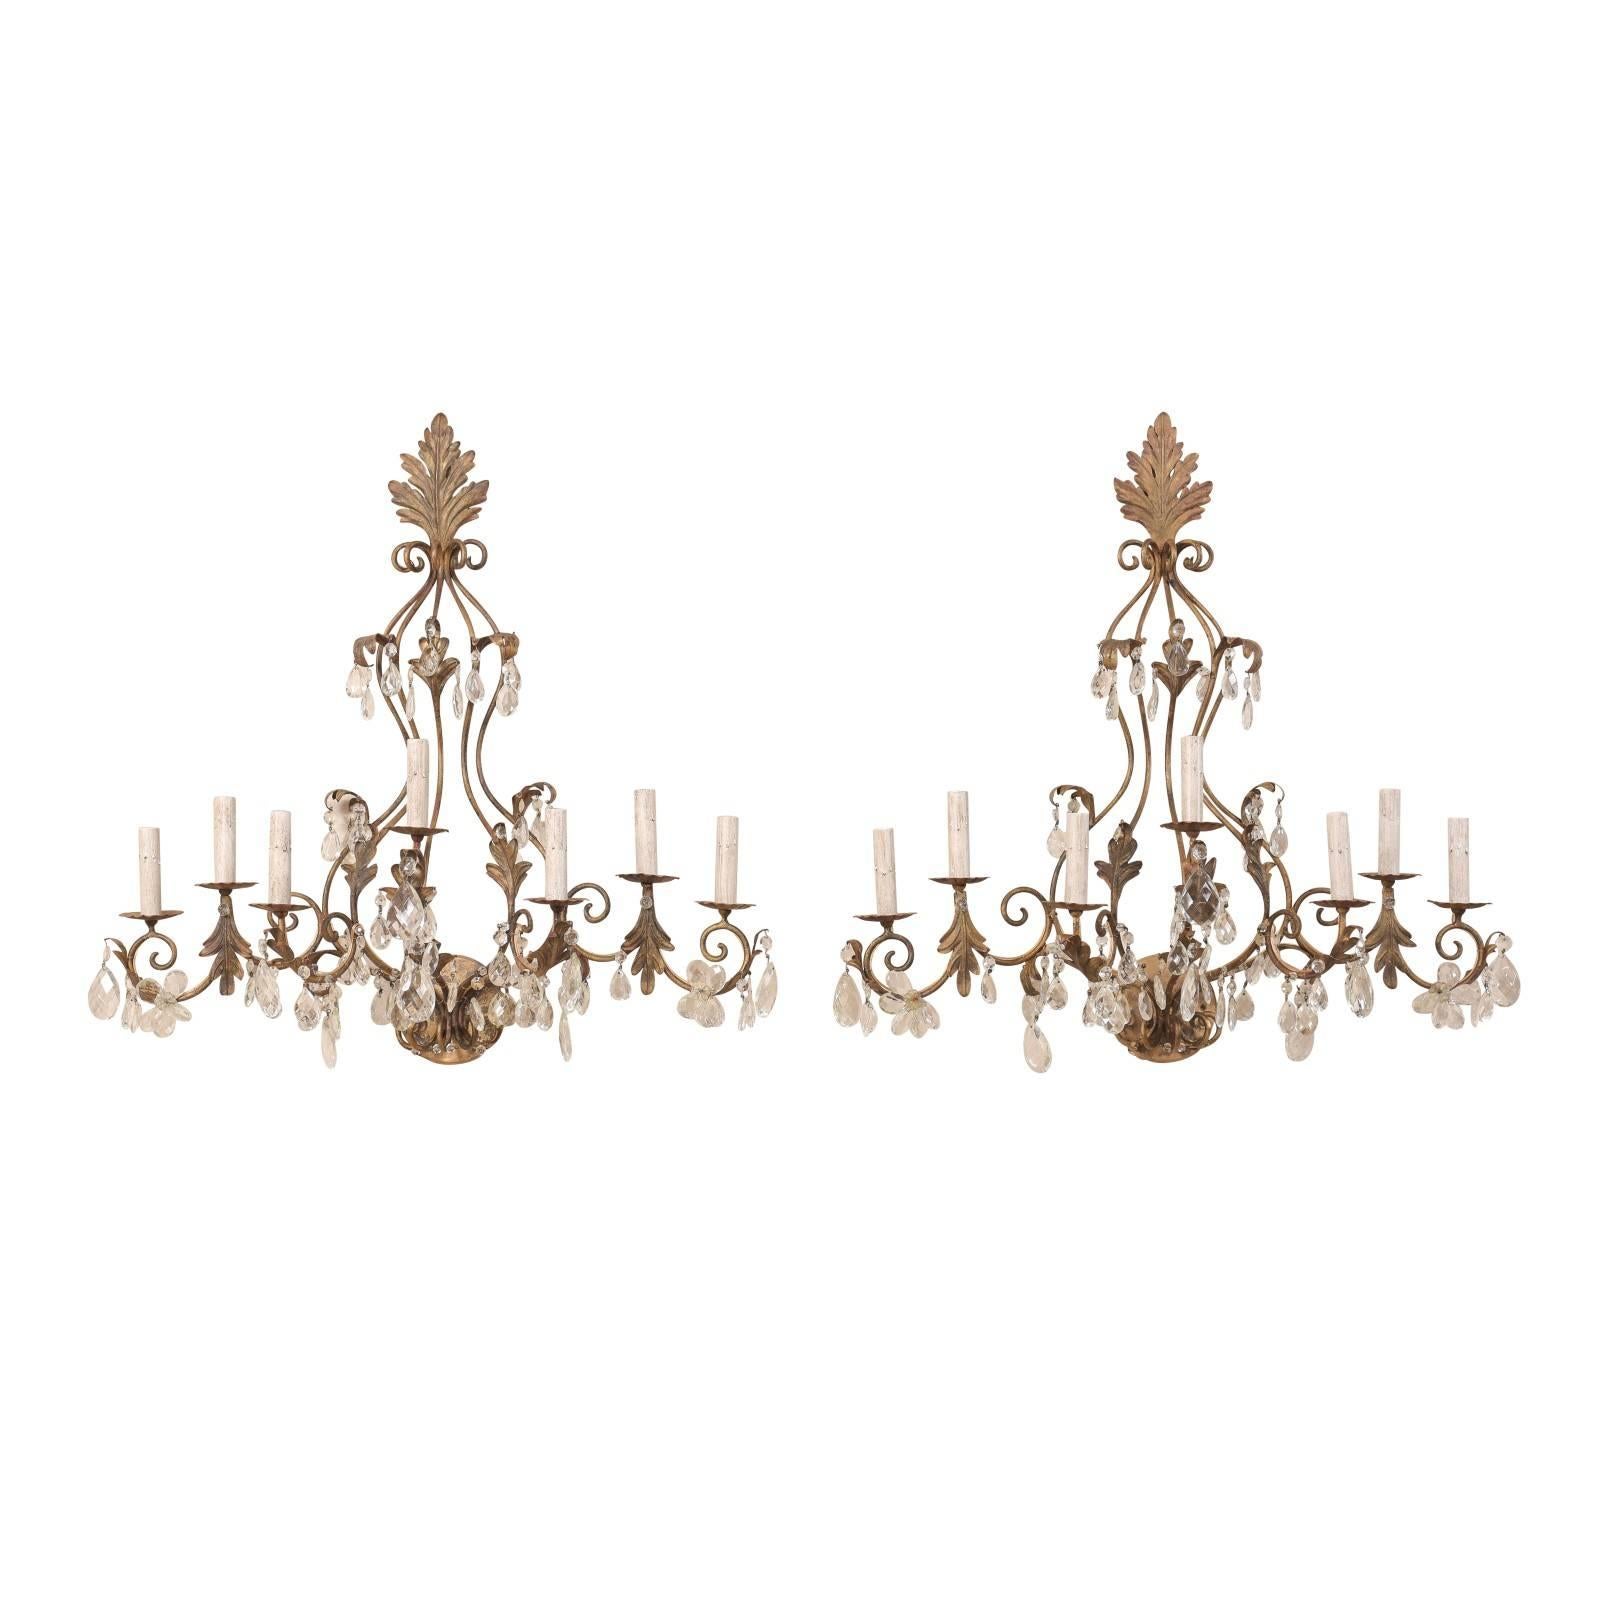 Pair of Mid-Century Seven-Light Crystal and Iron Sconces with Leaf Crest Tops For Sale